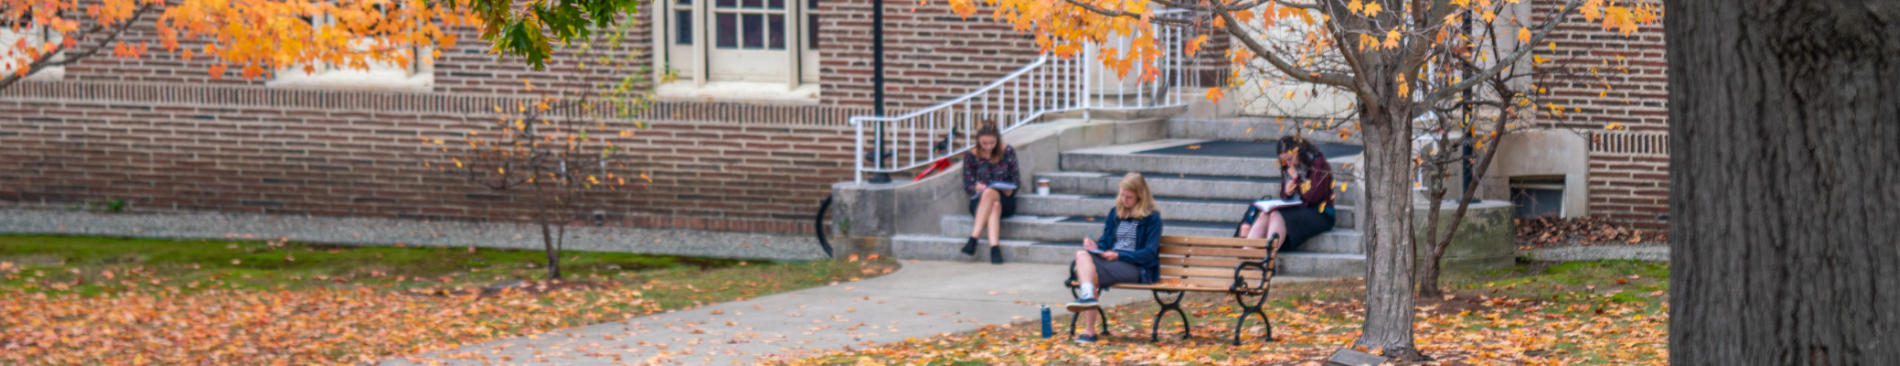 Students study on New England campus